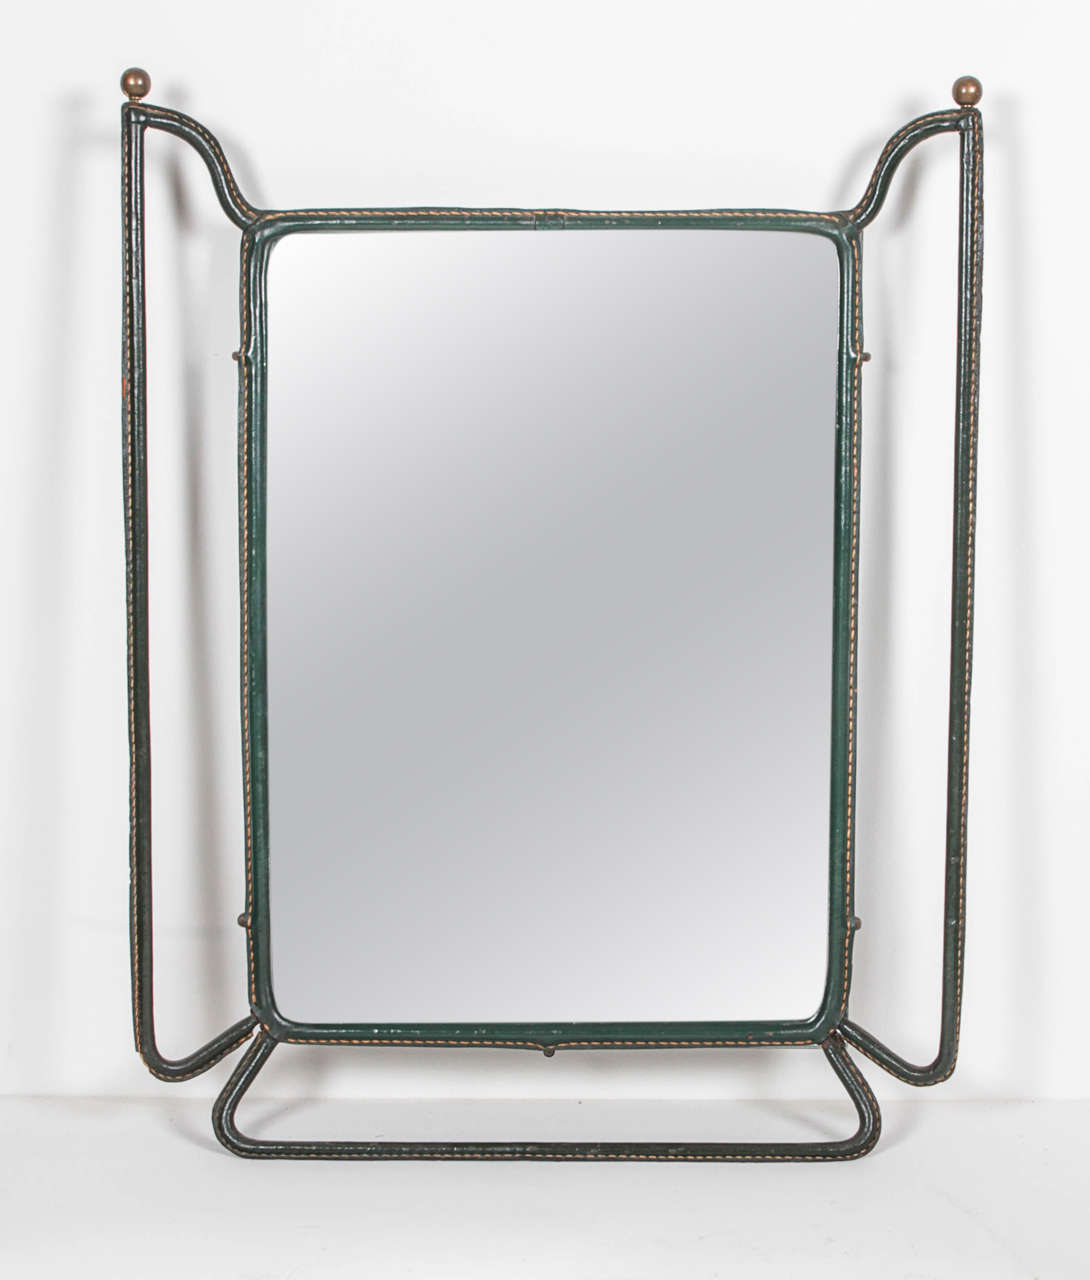 Jacques Adnet,  Circa 1955
Rectangular Mirror and Magazine stand  in tubular metal covered in dark green leather with top stitched detail.